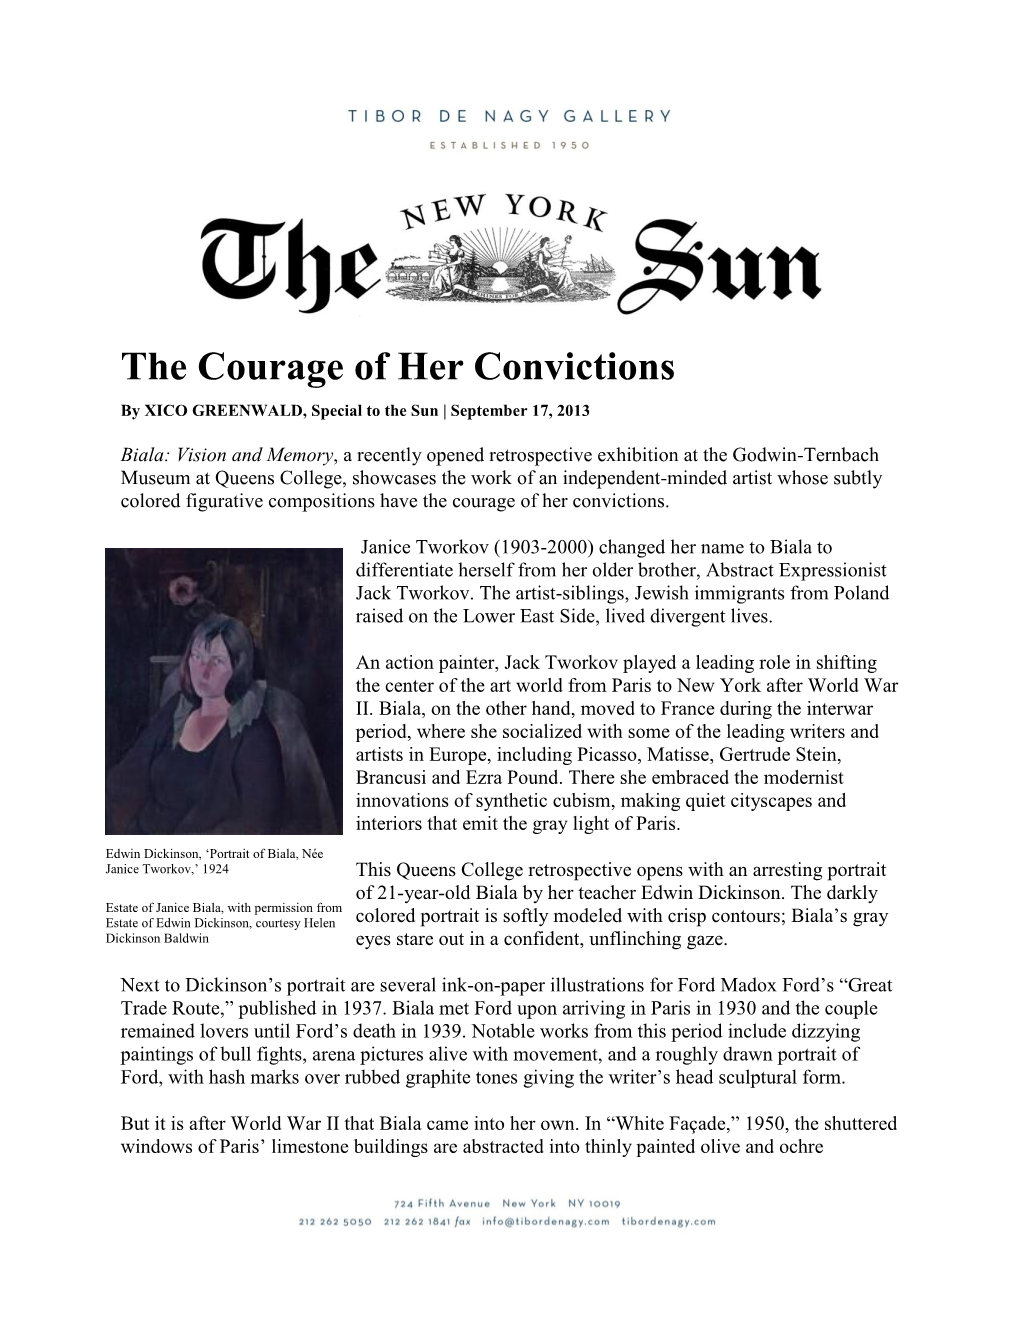 The Courage of Her Convictions by XICO GREENWALD, Special to the Sun | September 17, 2013